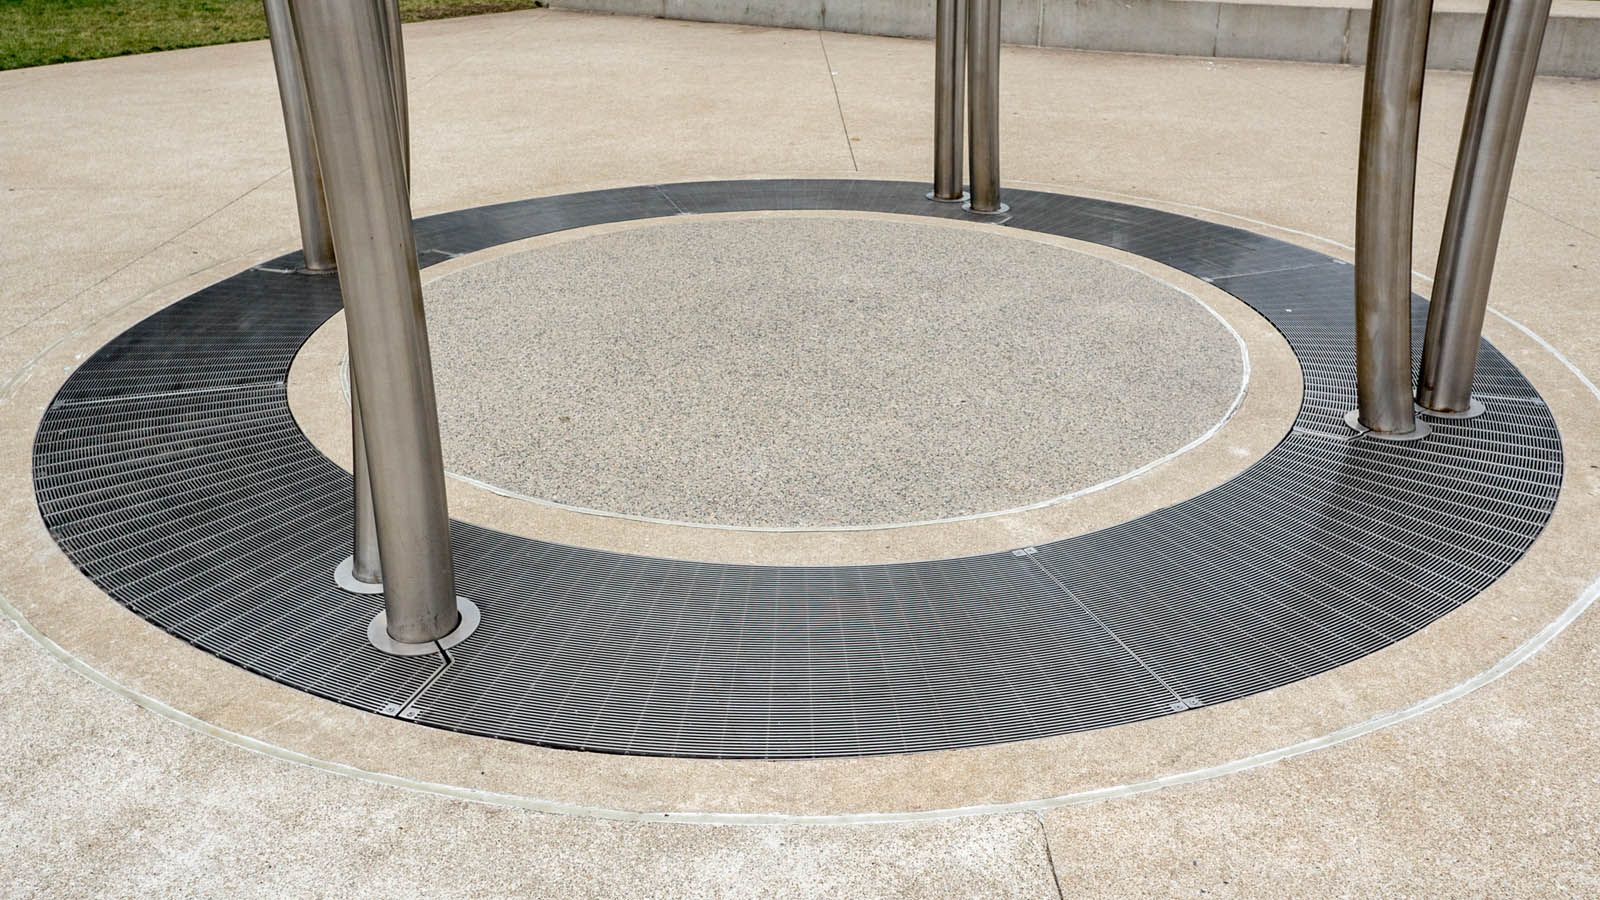 Trench Grating & Fountain Drain Covers